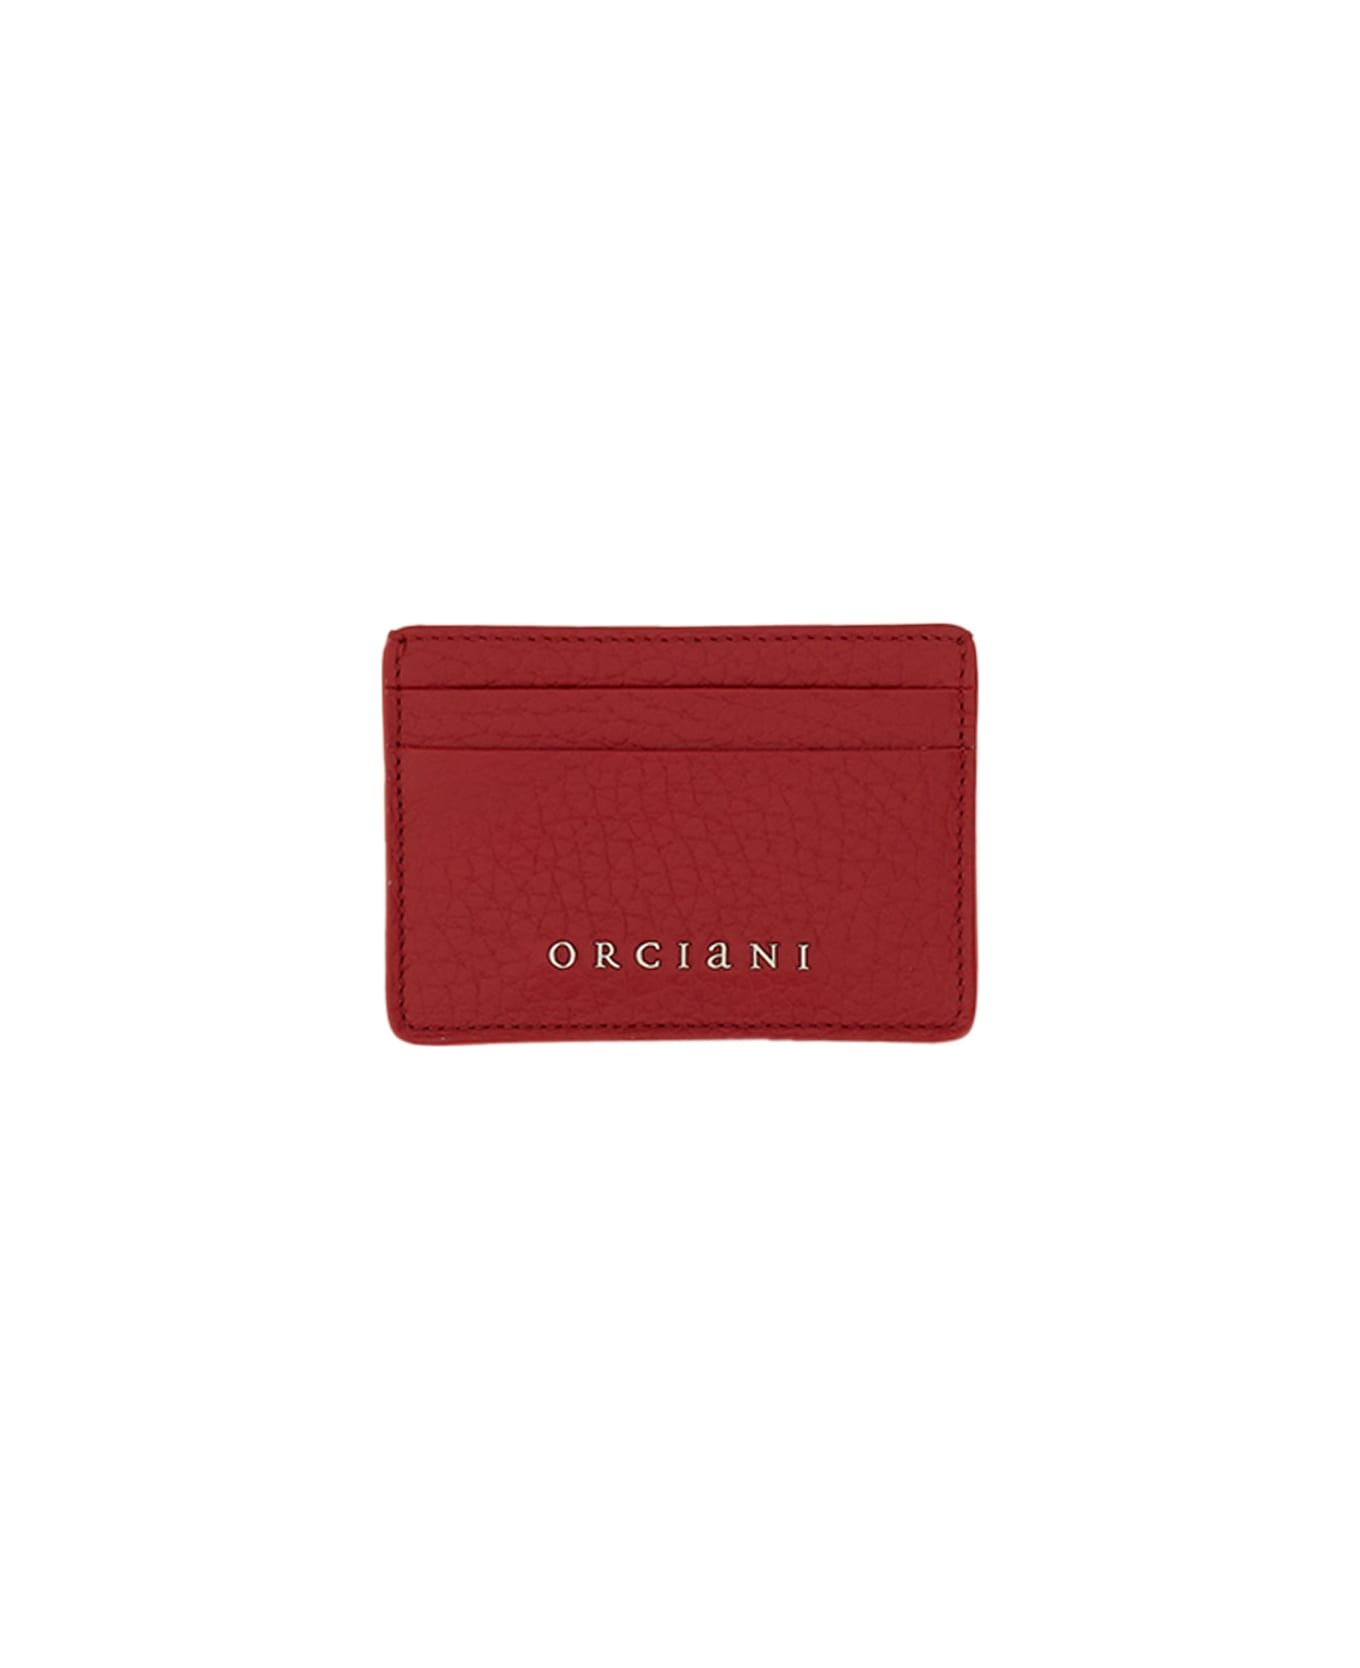 Orciani Soft Card Holder - RED